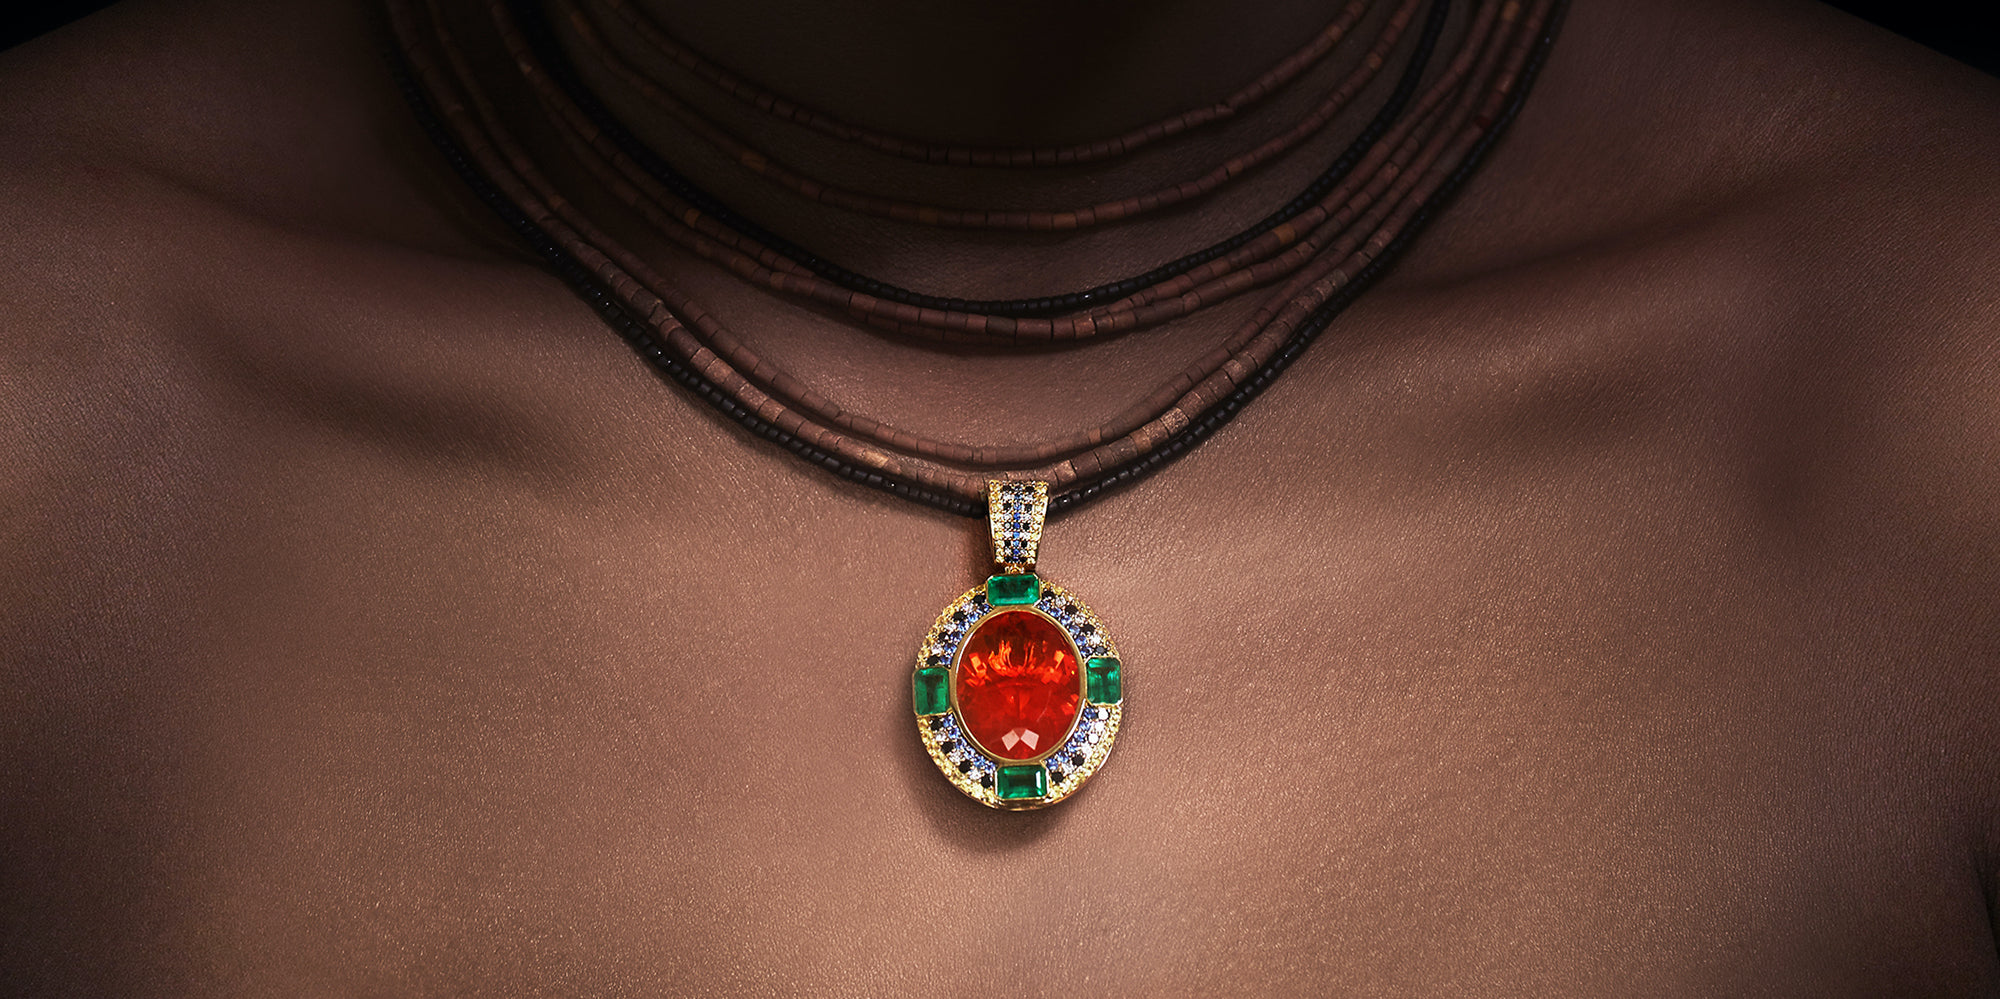 Pendant with fire opal from Mexico, diamonds, and emeralds